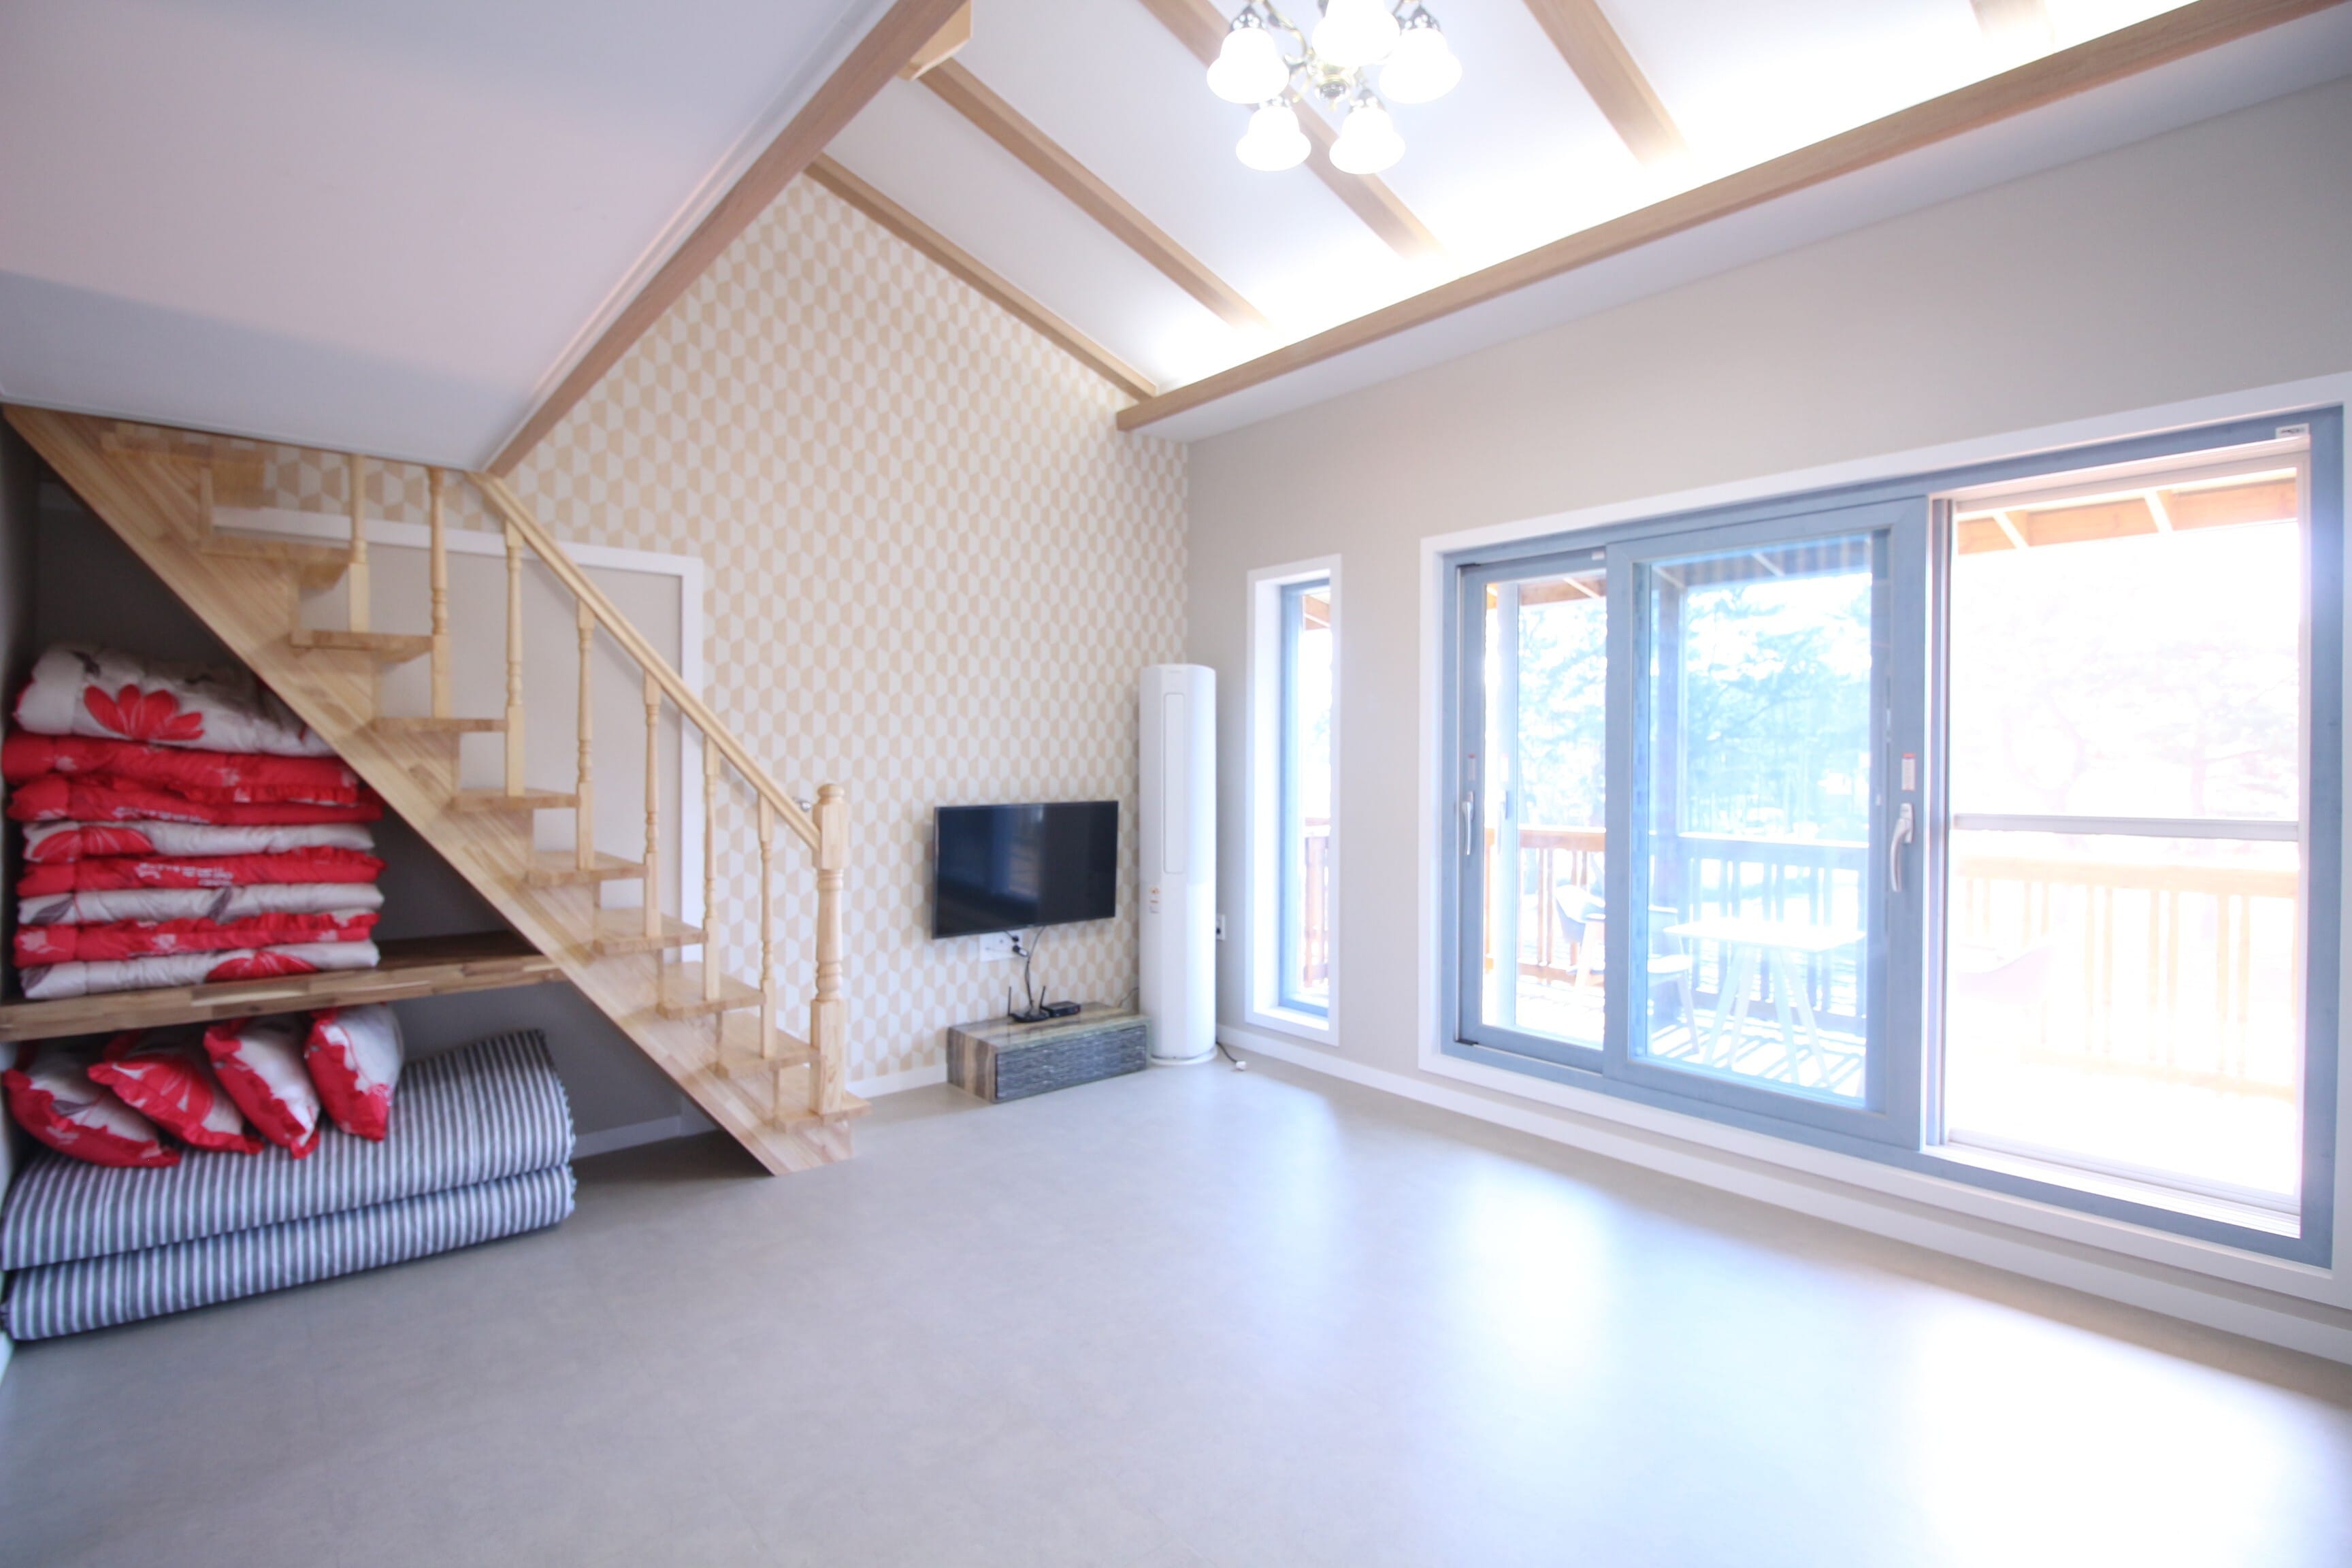 Property Image 1 - Duplex type healing house in Taean 